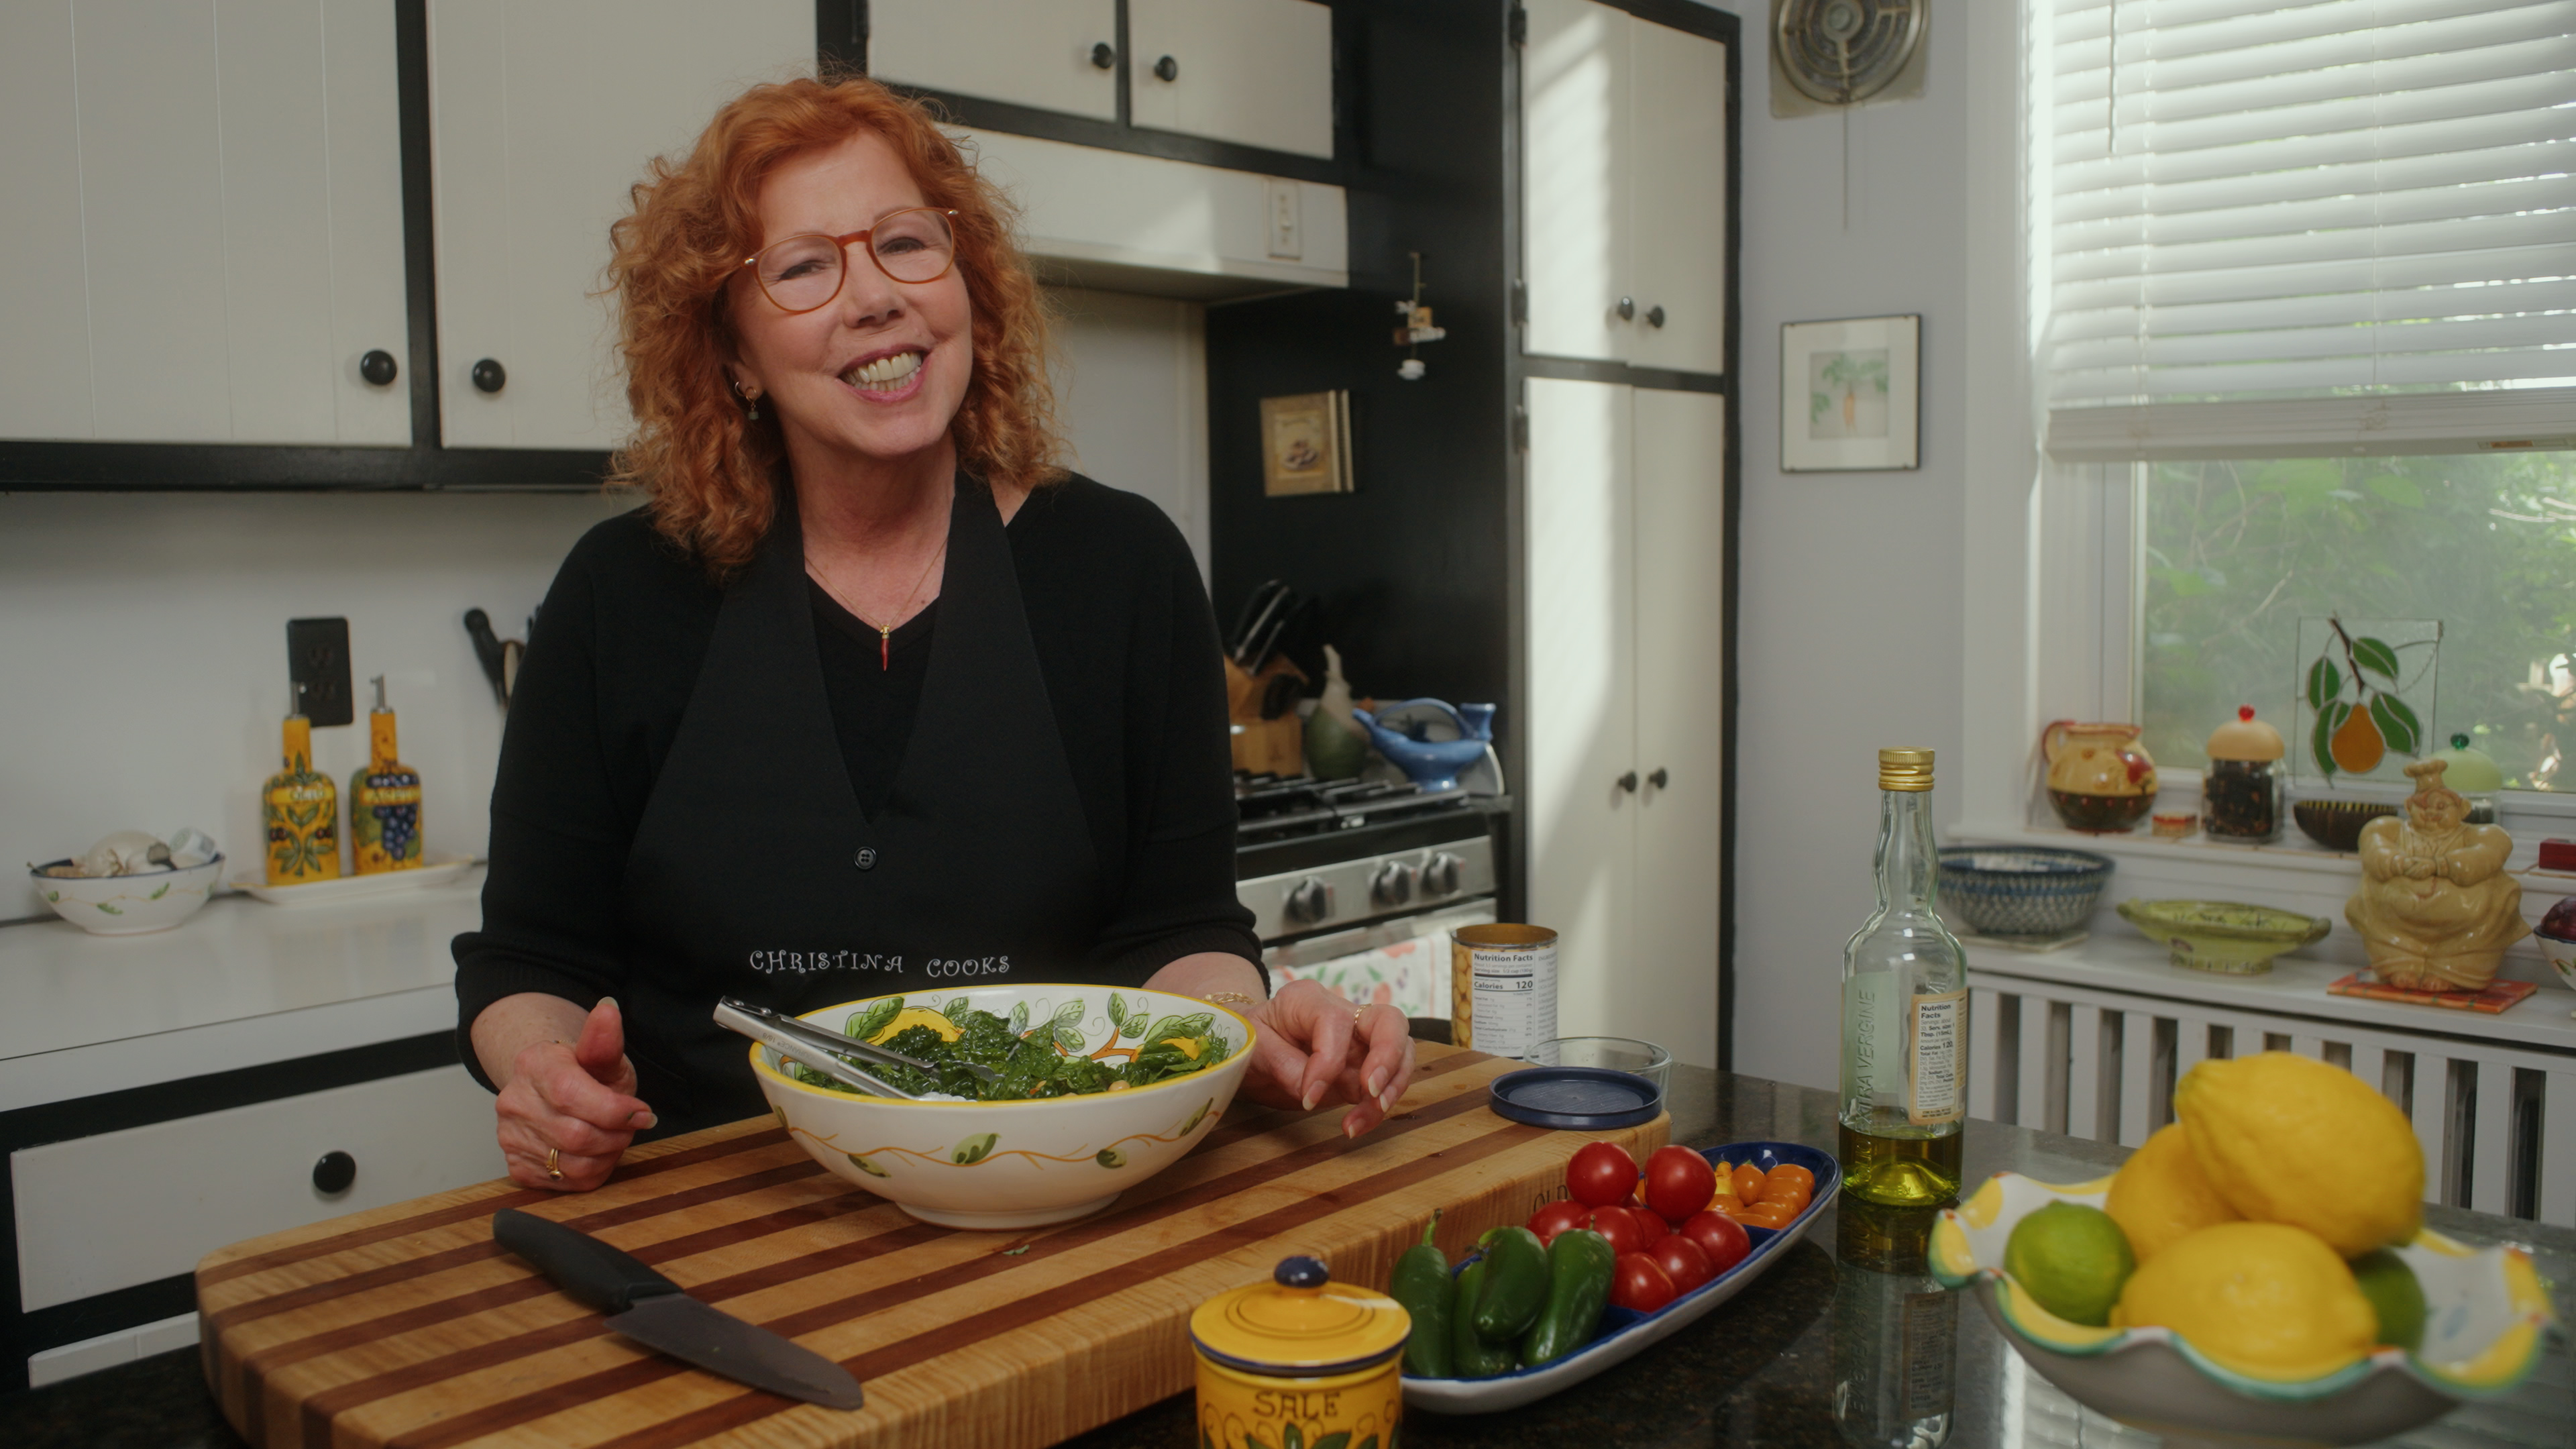 Check local listings for Christina Cooks: Back to the Cutting Board Season 5 airing on a station near you!